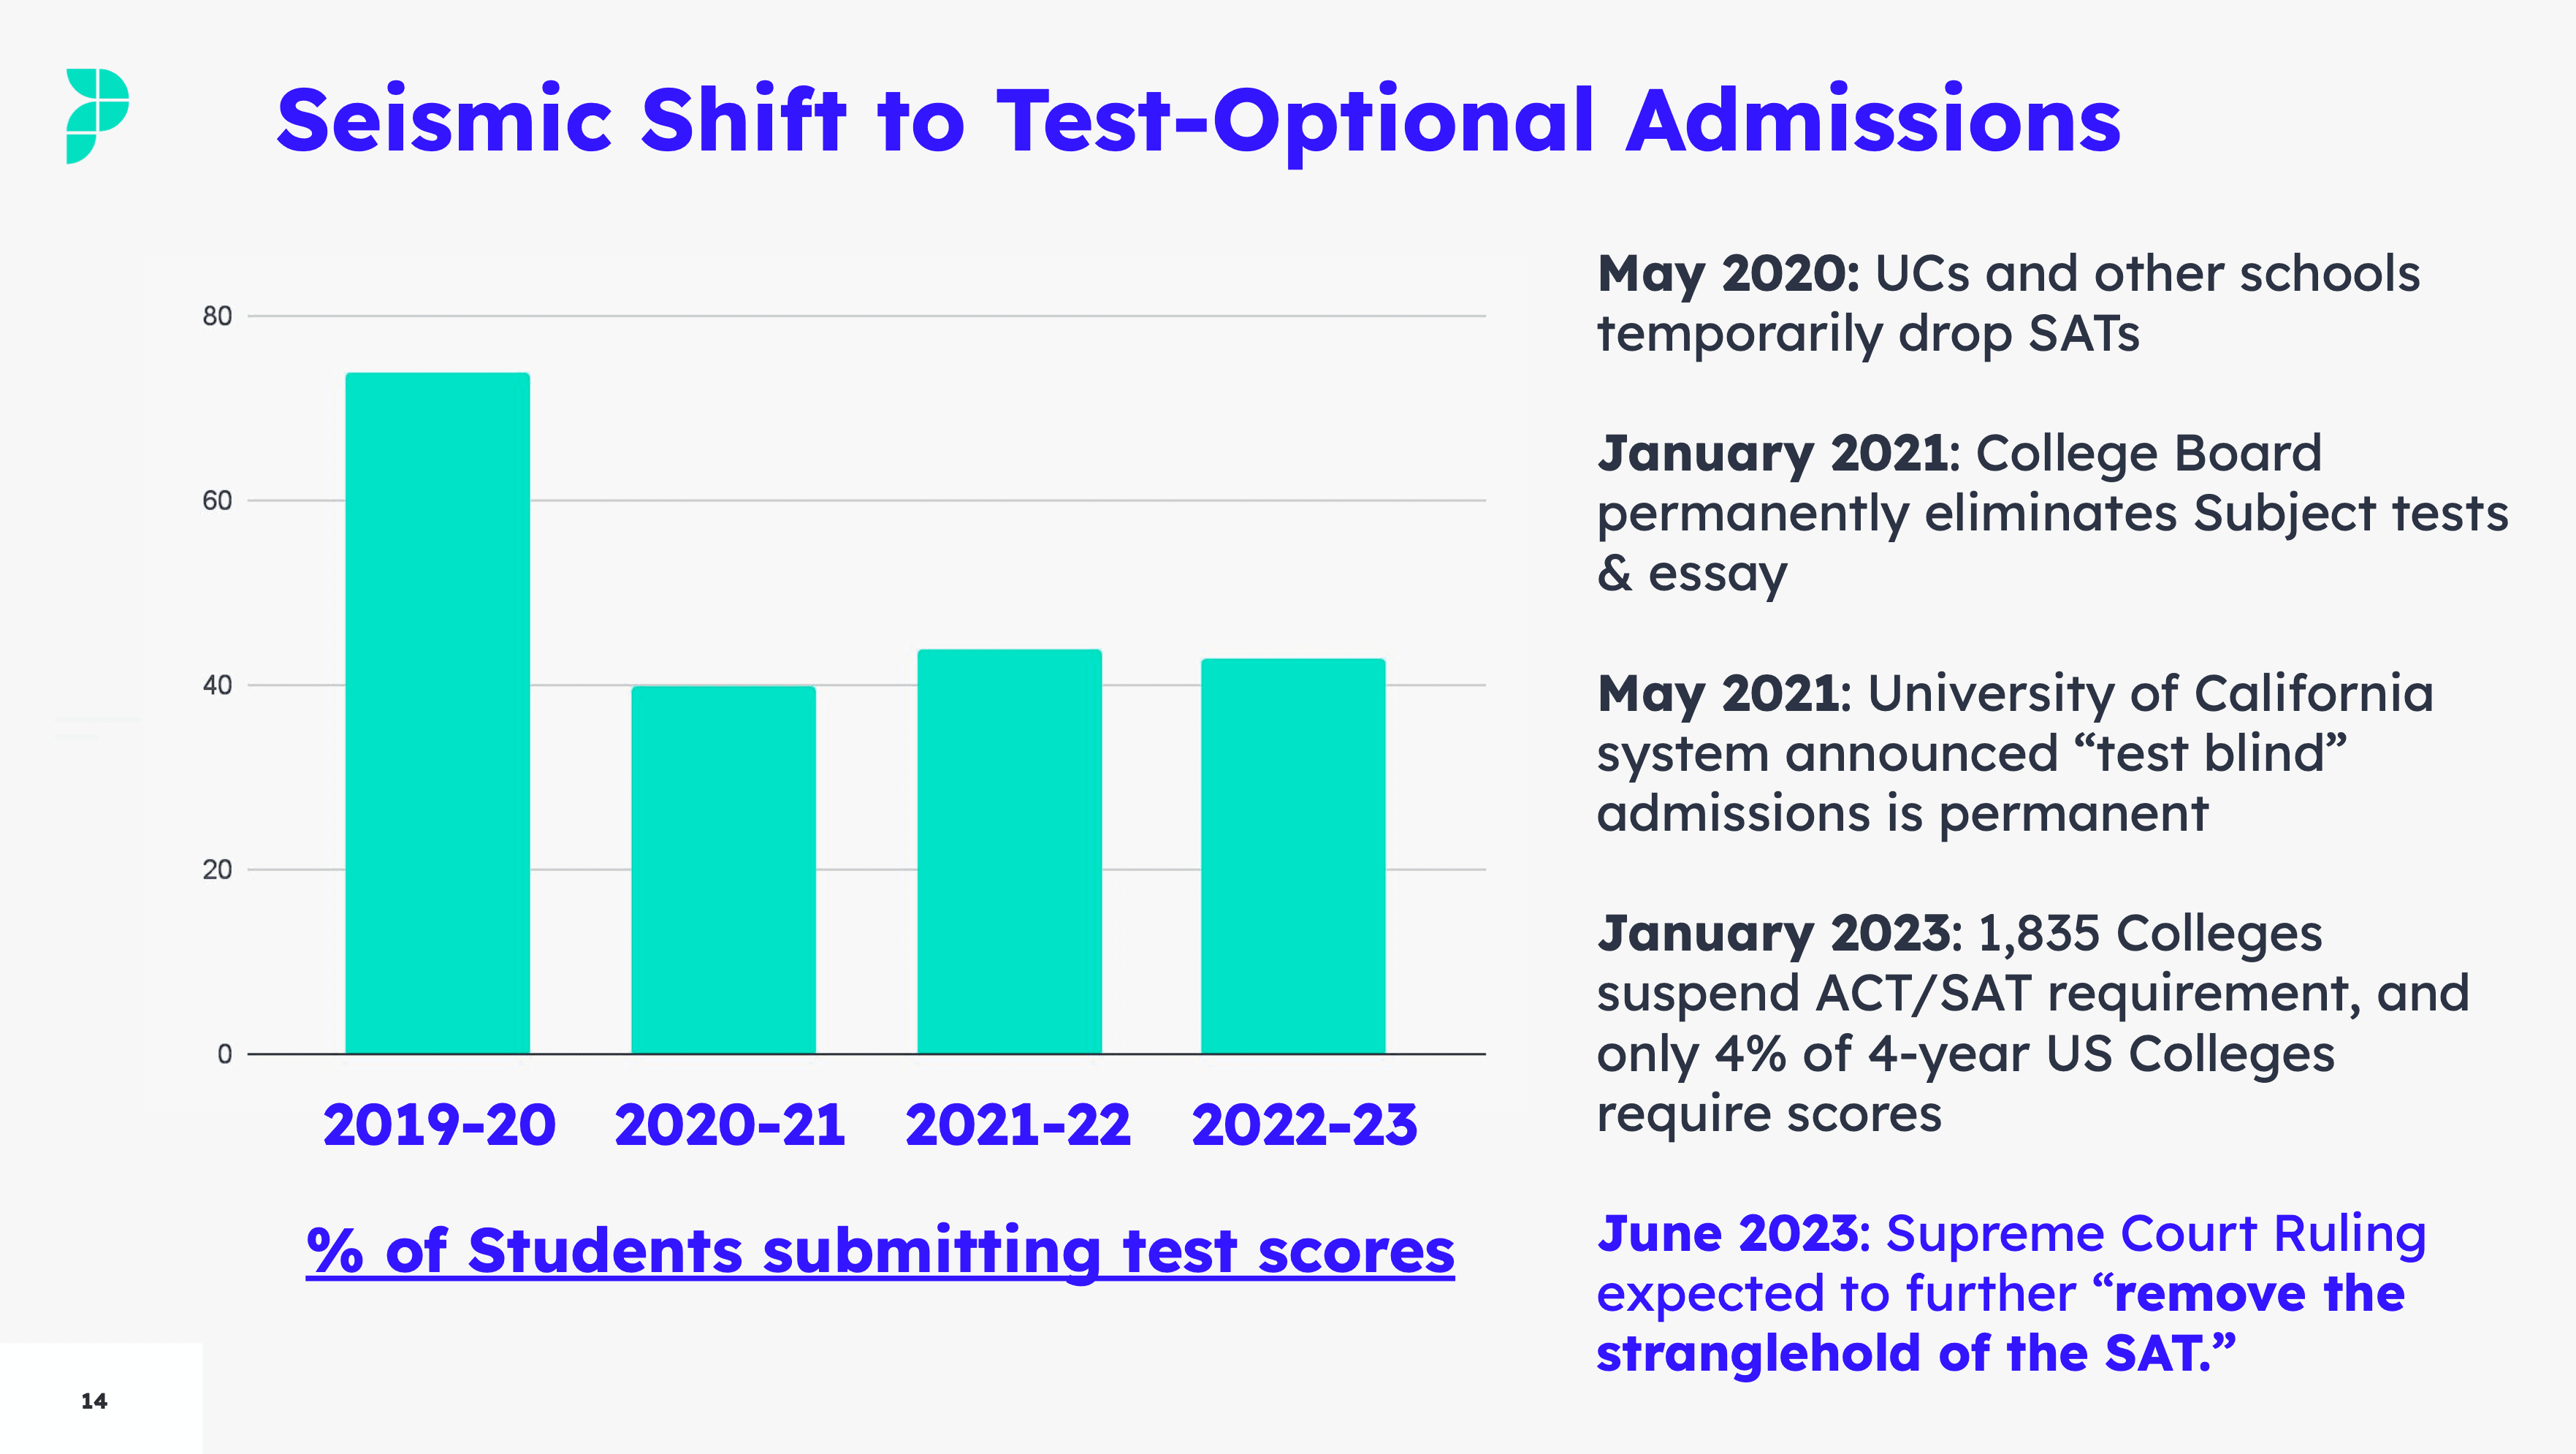 bar chart depicting change in percentage of students submitting test scores each year from 2019 through 2023